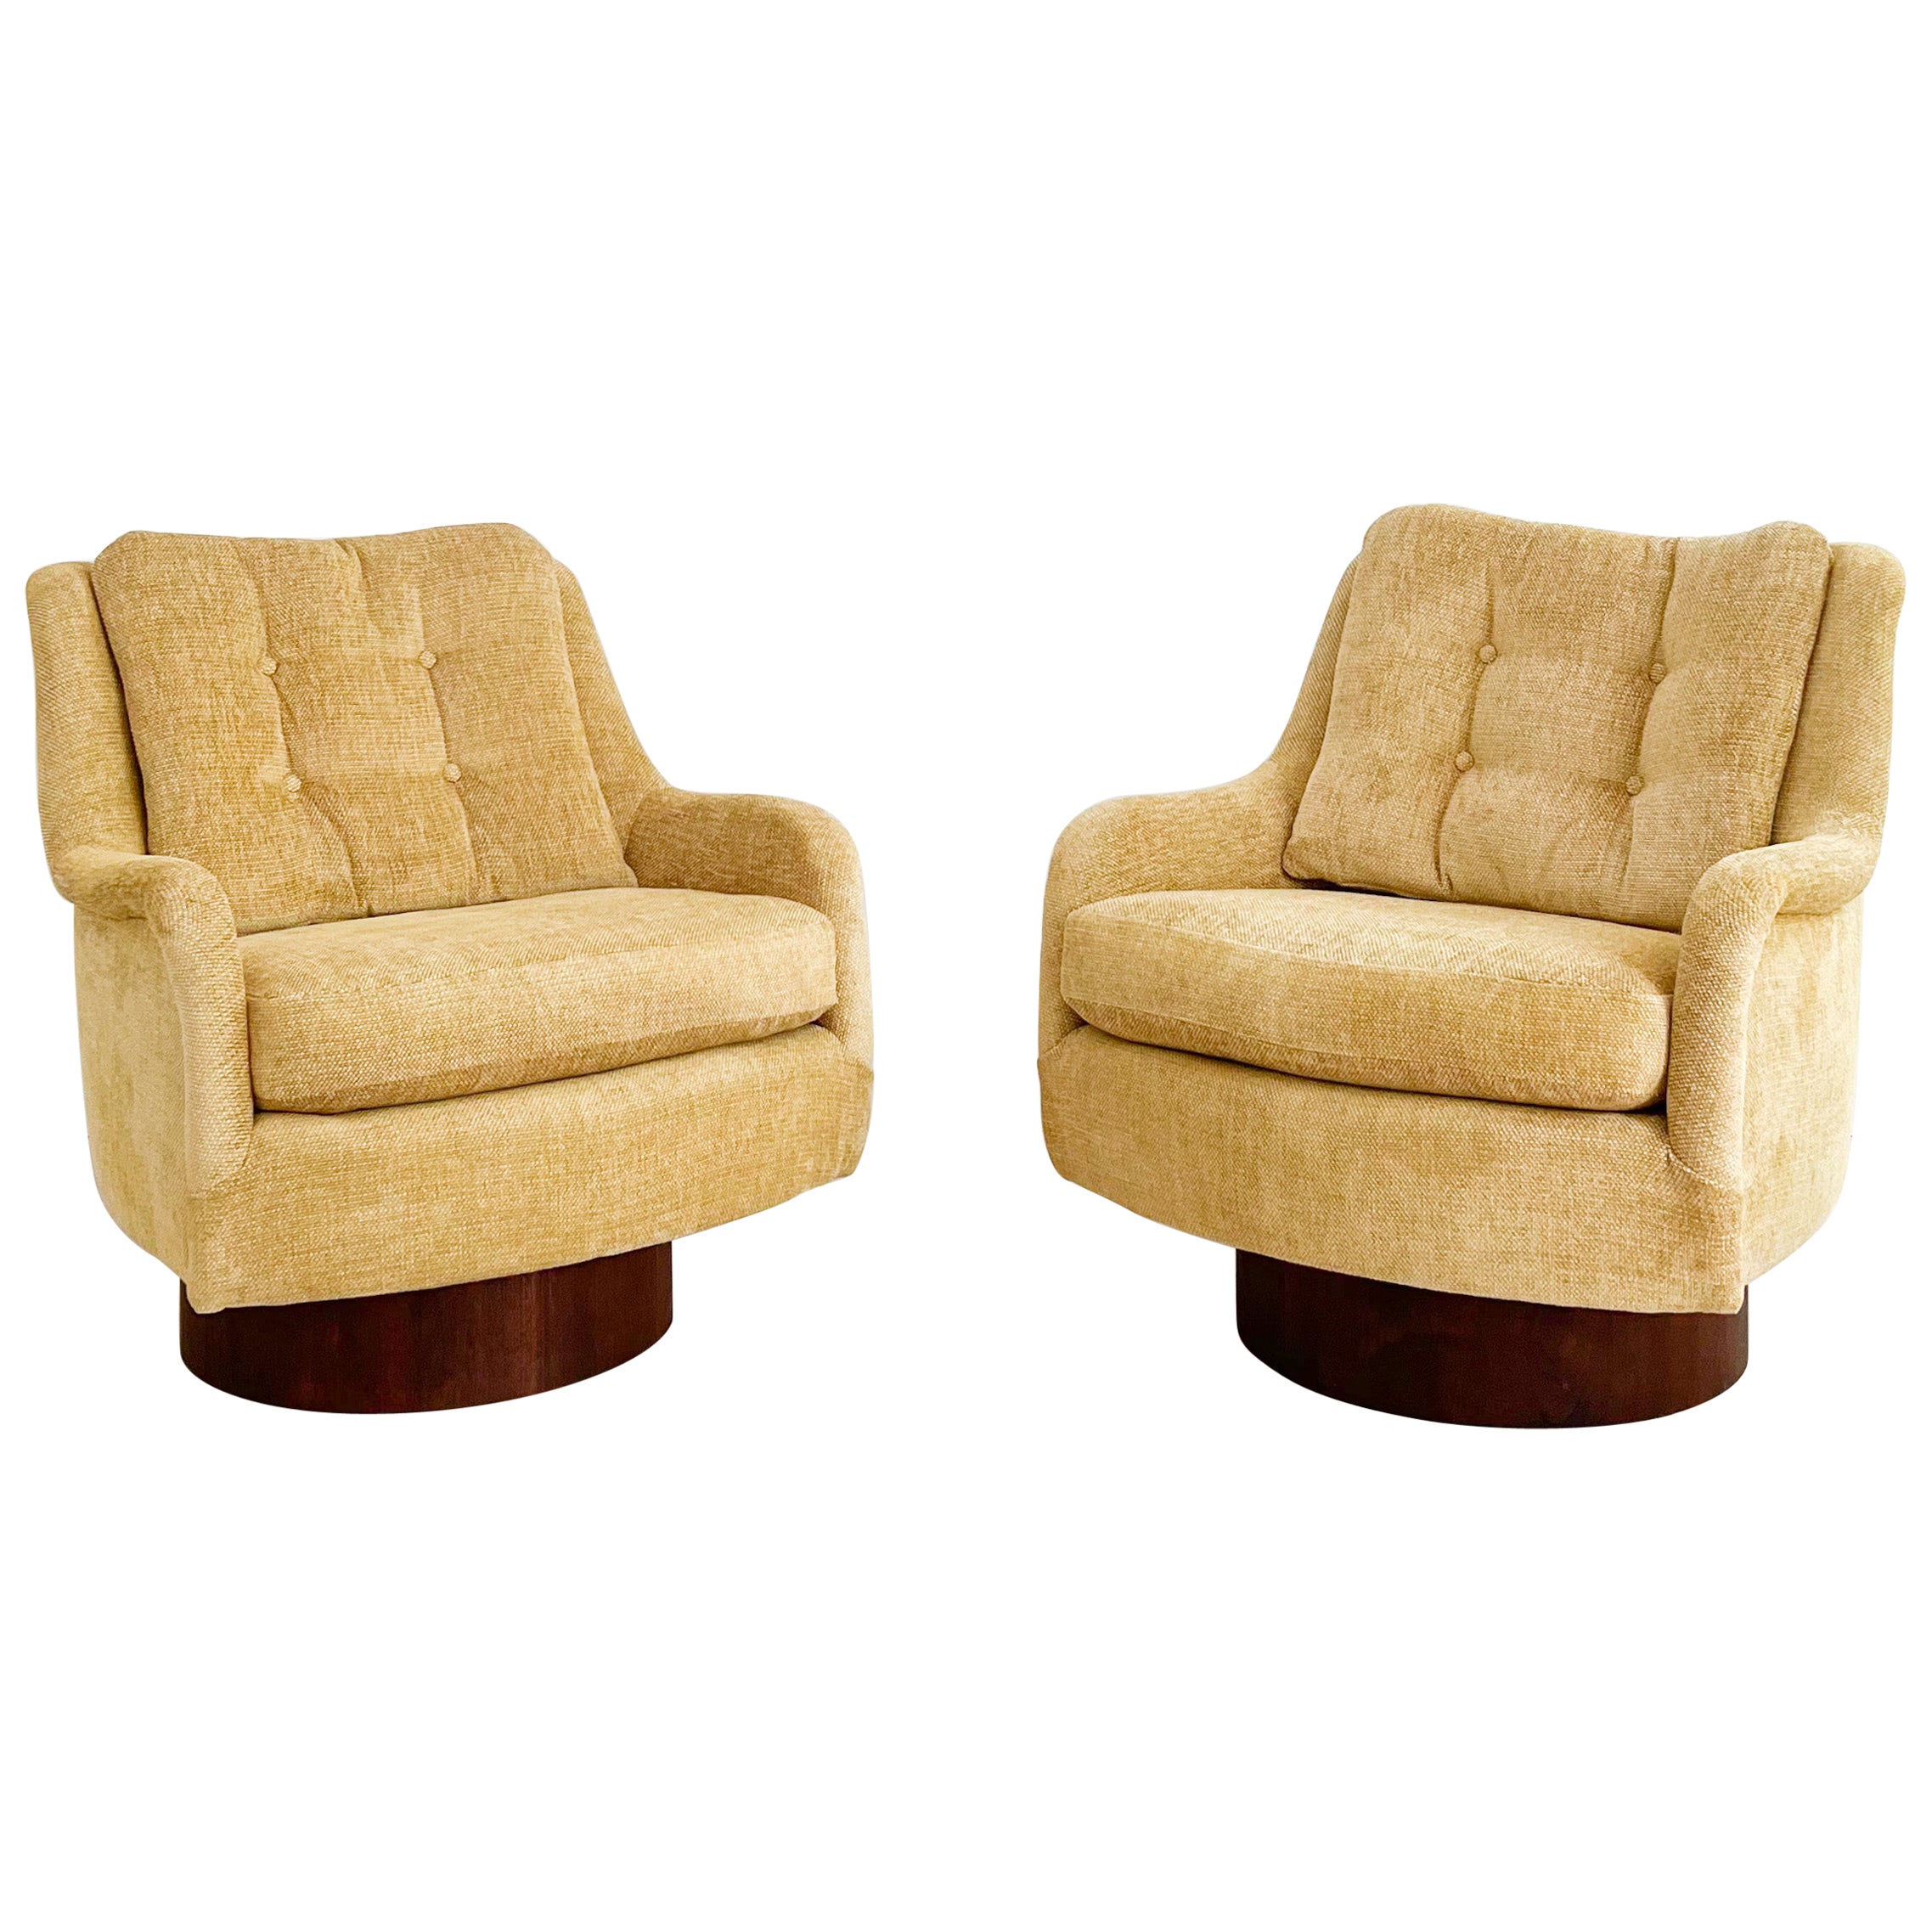 Pair of Swivel Rockers w/ New Upholstery, Attributed to Adrian Pearsall